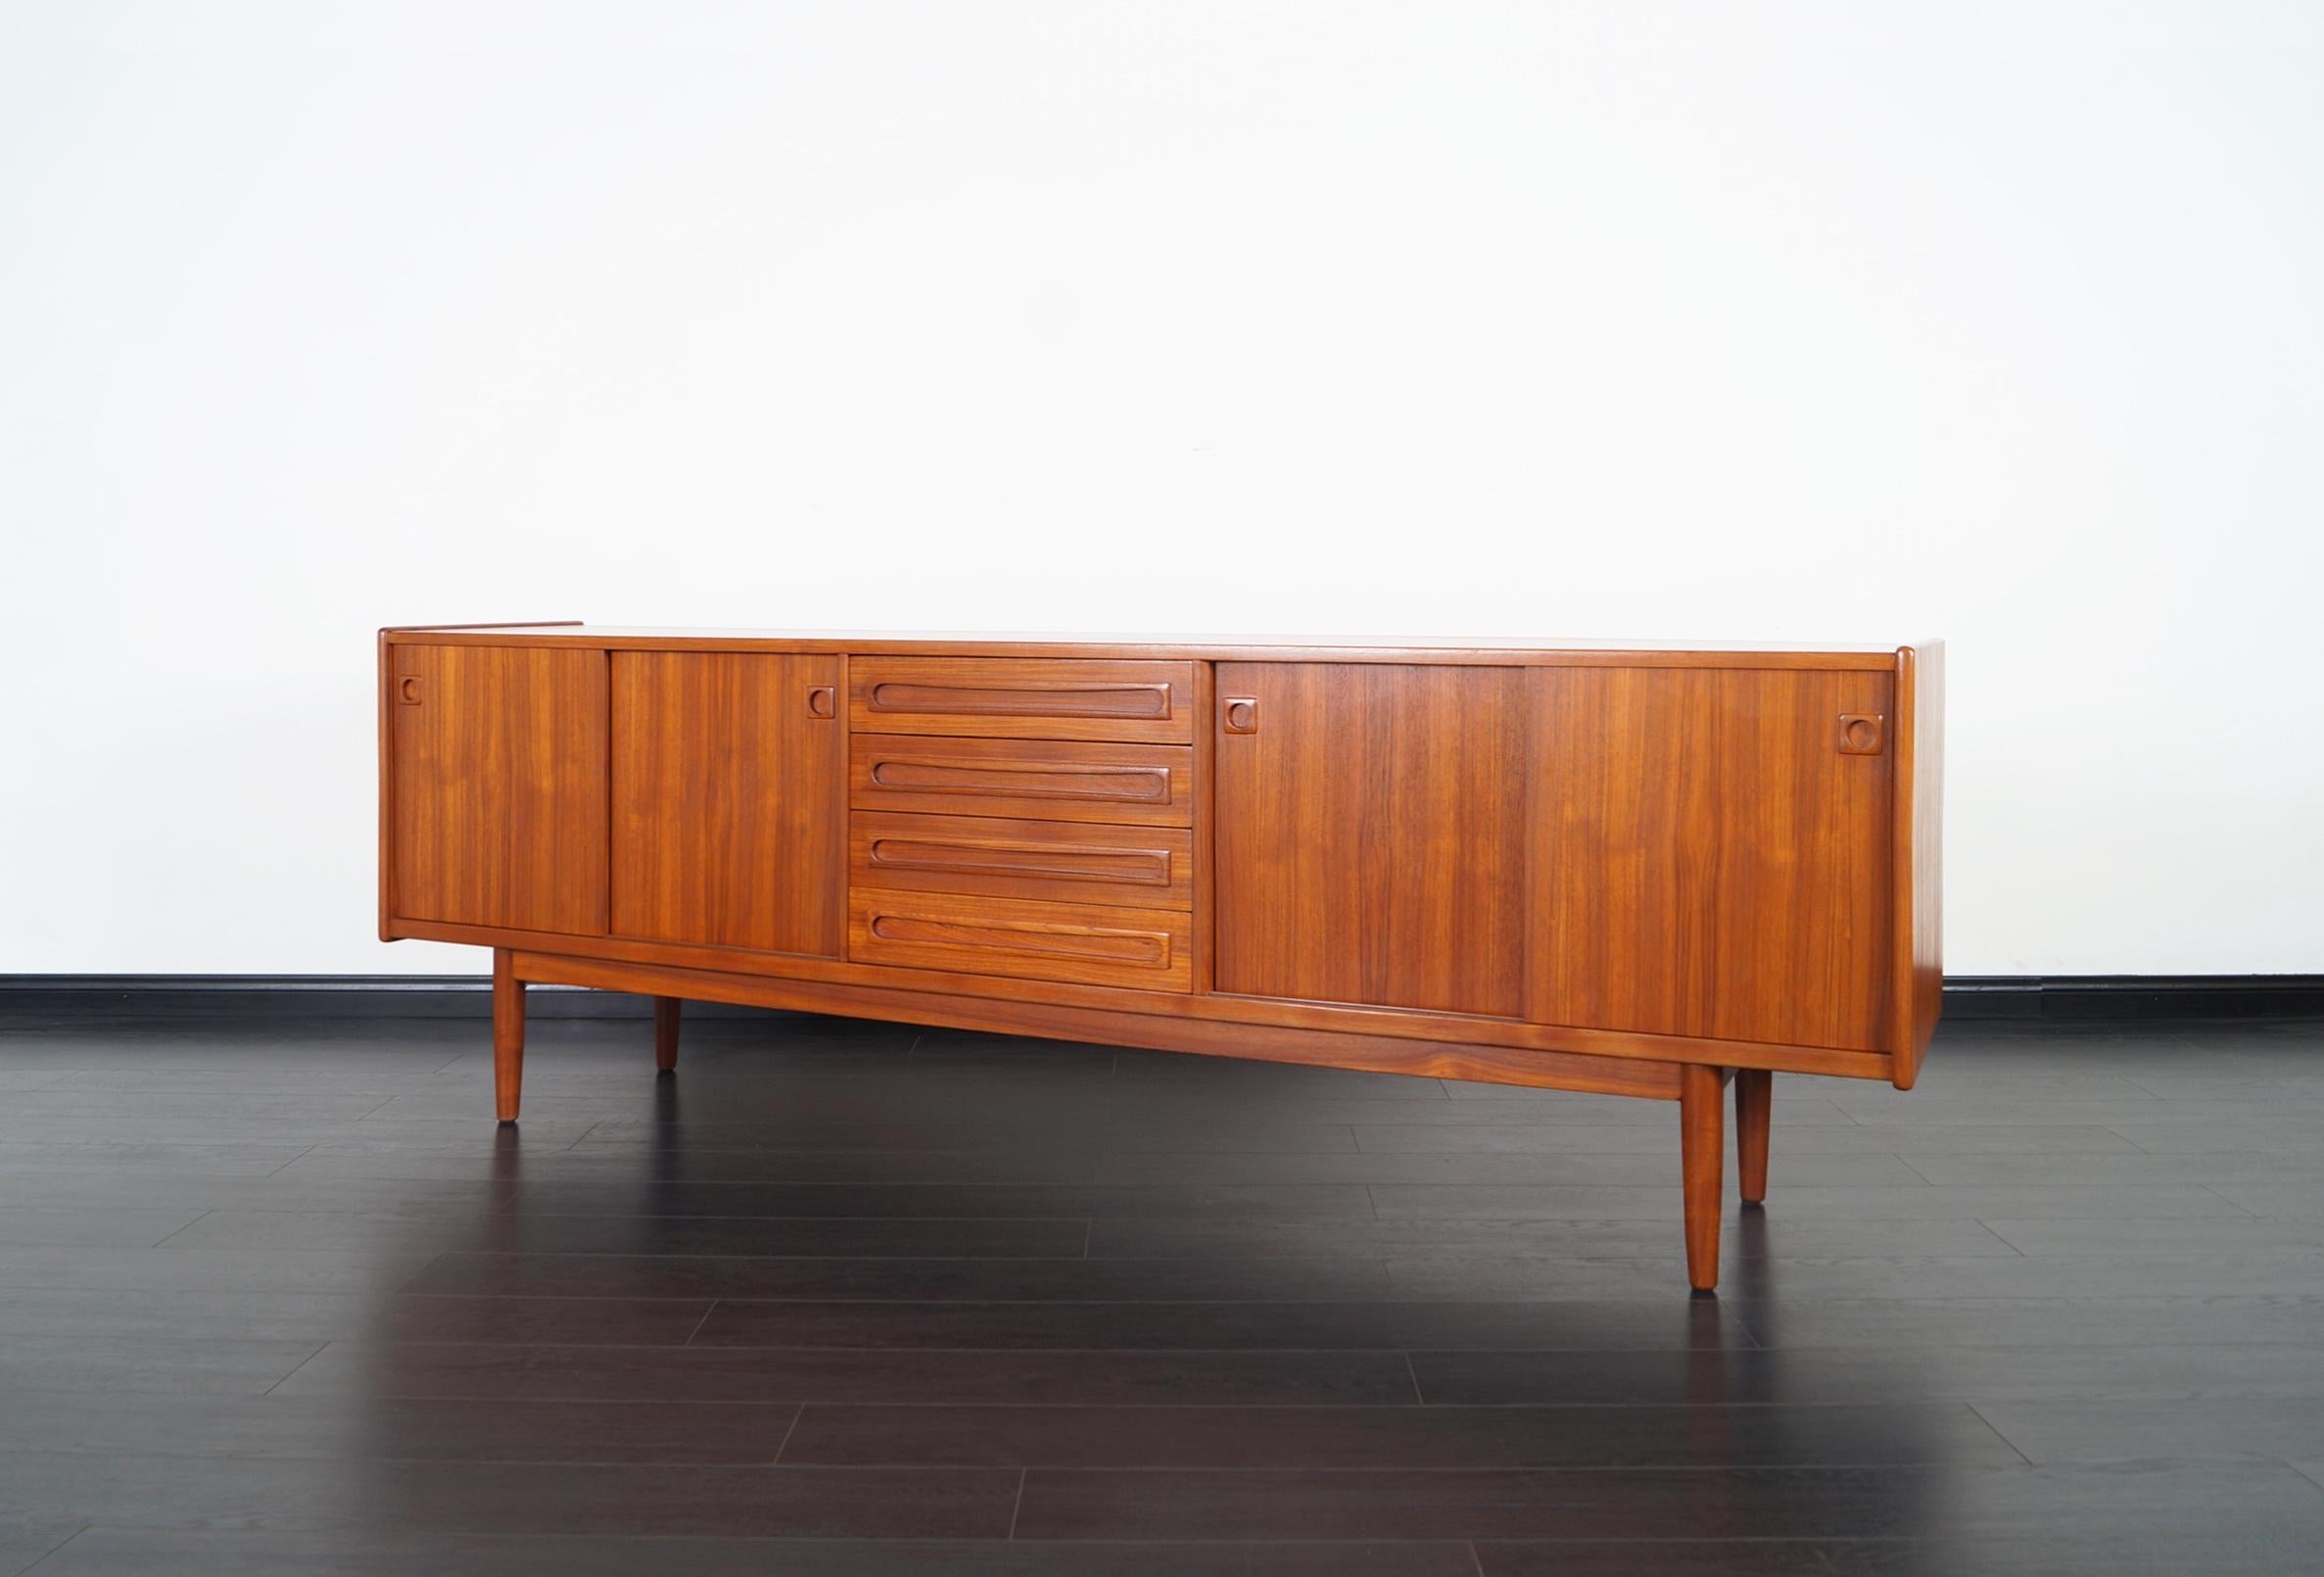 Danish modern teak credenza designed by Johannes Andersen for Skaaning Mobler. Features sliding doors with adjustable shelves on each end. The middle section of the piece has a series of four pull-out drawers for additional storage.